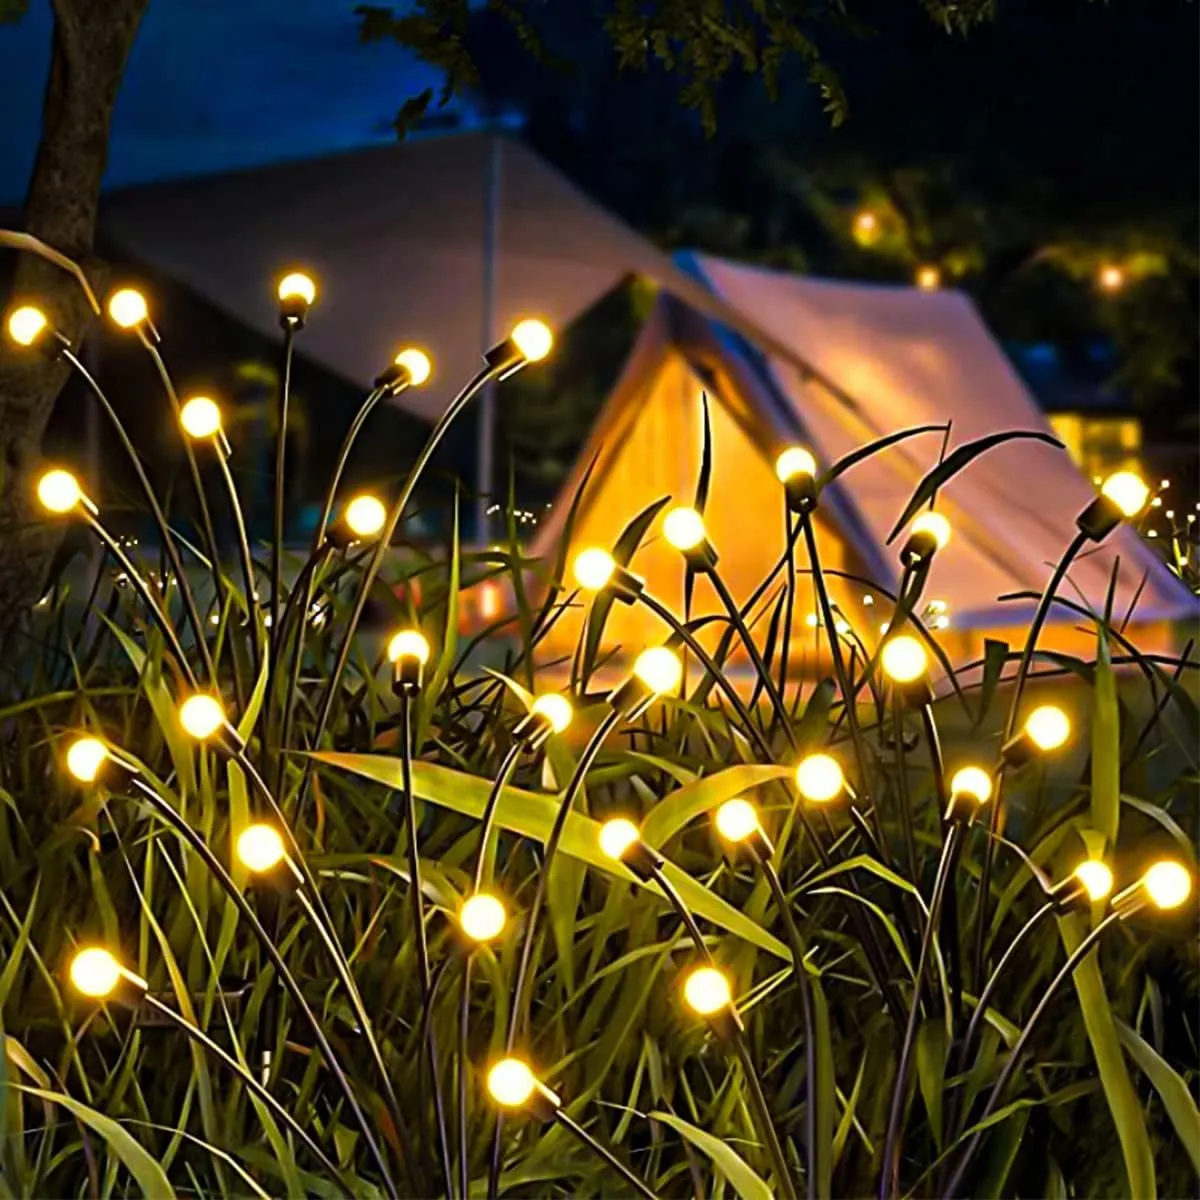 18 outdoor lighting ideas to make your garden glow - Gathered